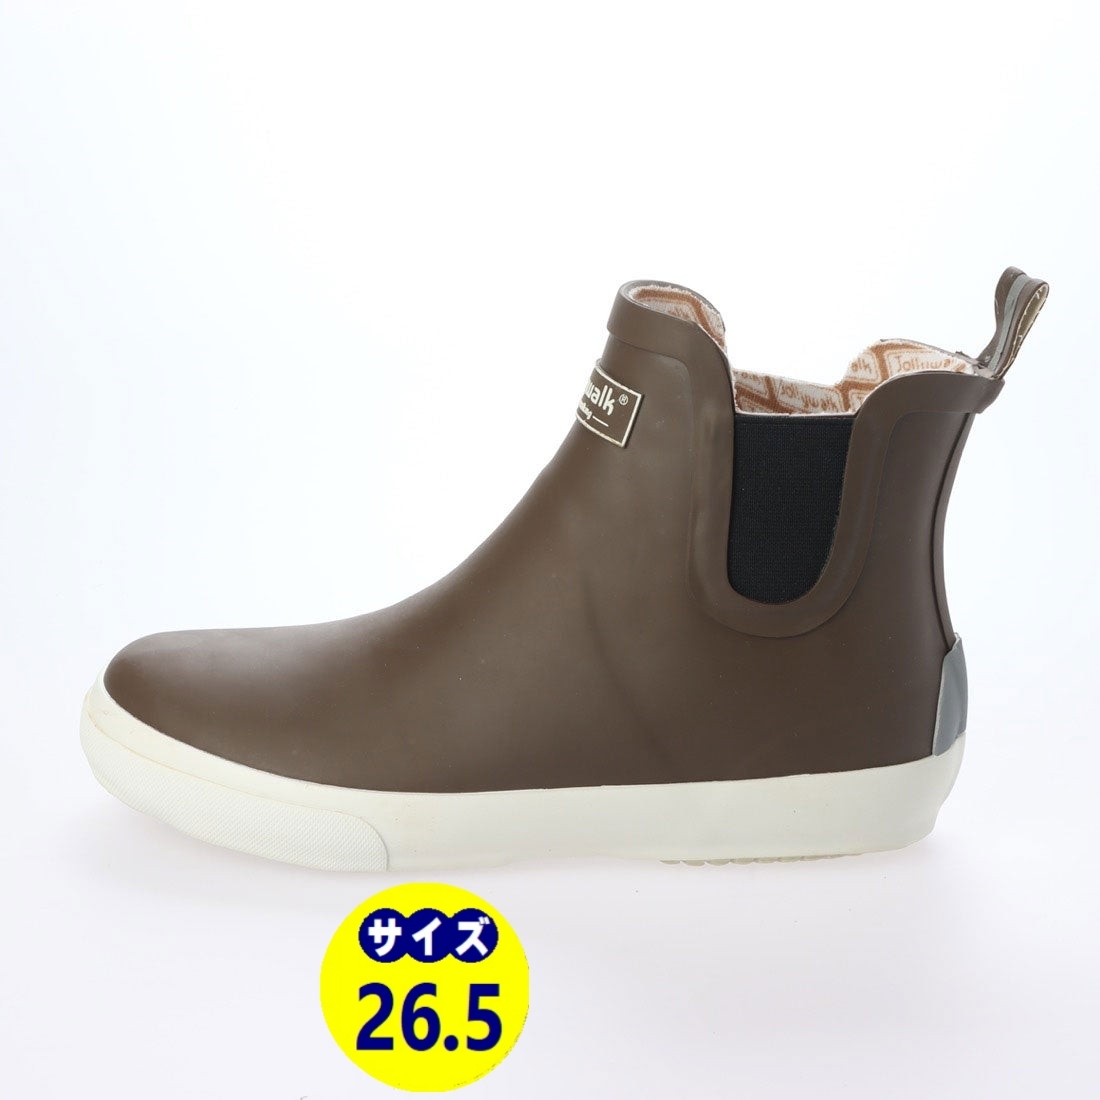  men's rain boots rain shoes boots rain shoes natural rubber material new goods [20088-BRN-265]26.5cm stock one . sale 